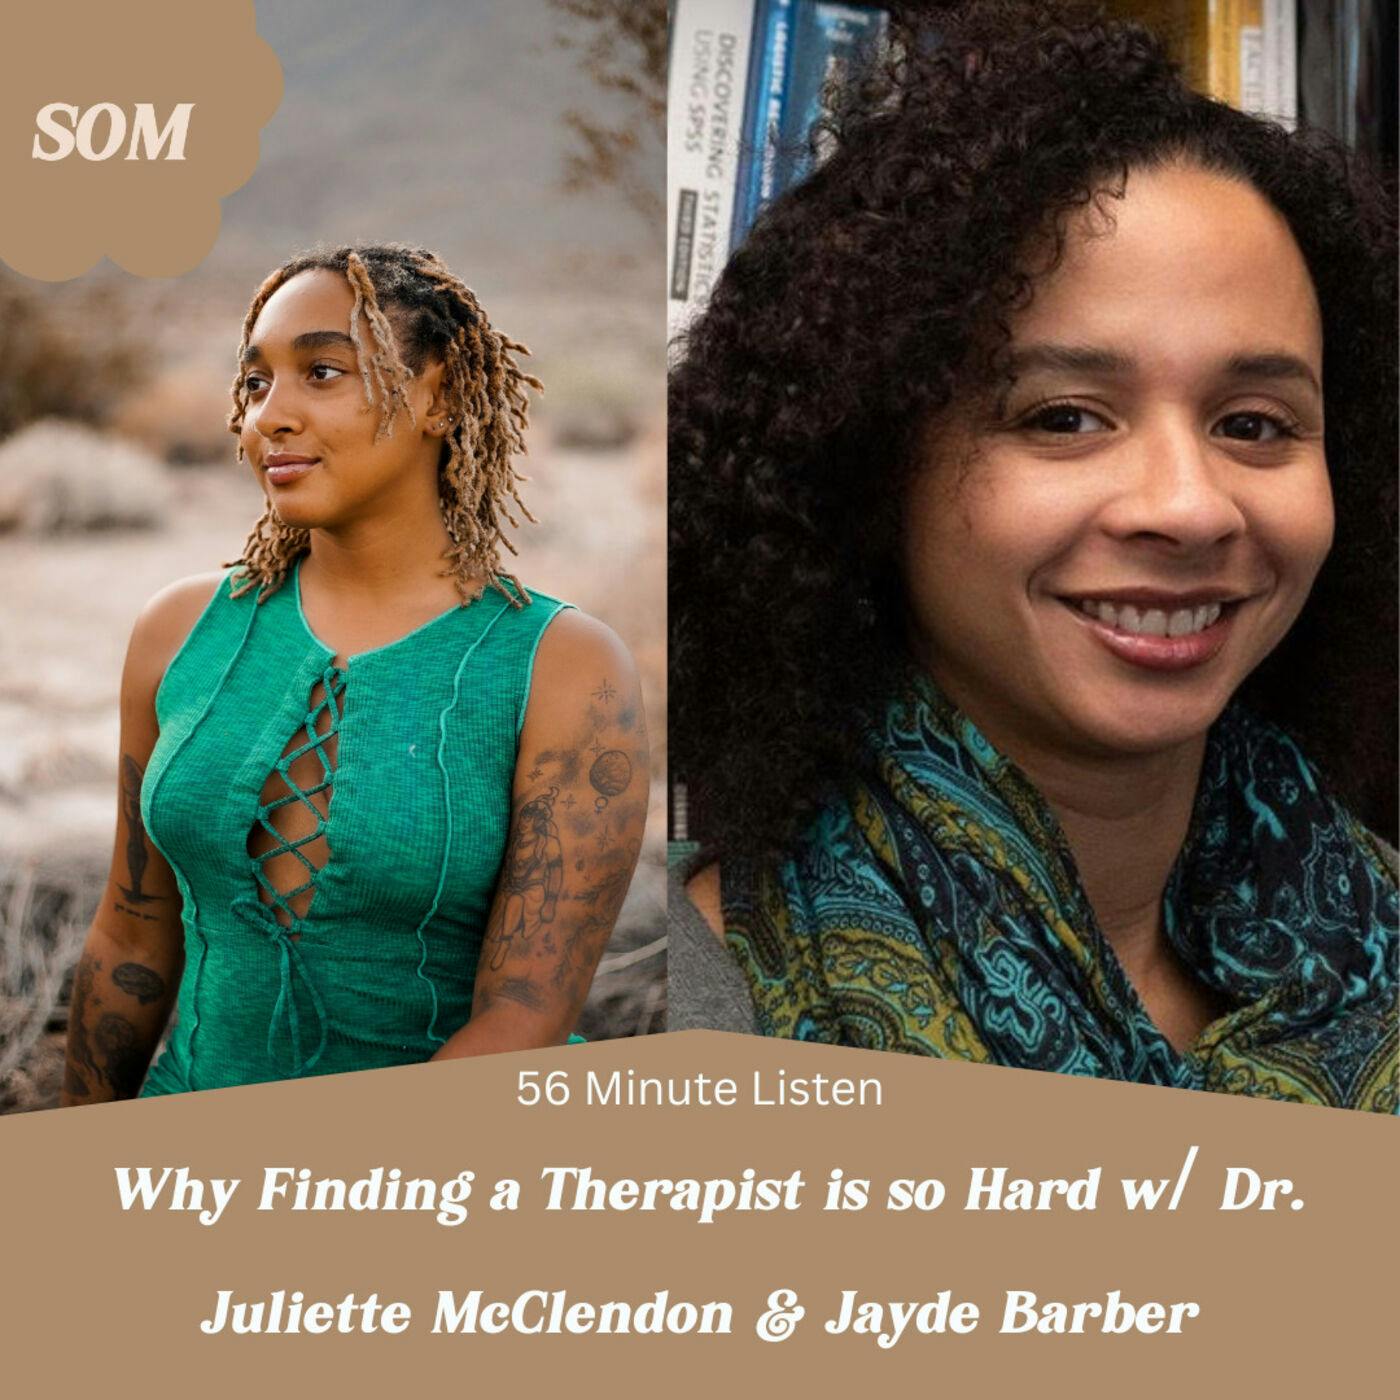 Why Finding a Therapist is so Hard & Tips on Finding Care w/ Dr. Juliette McClendon & Jayde Barber